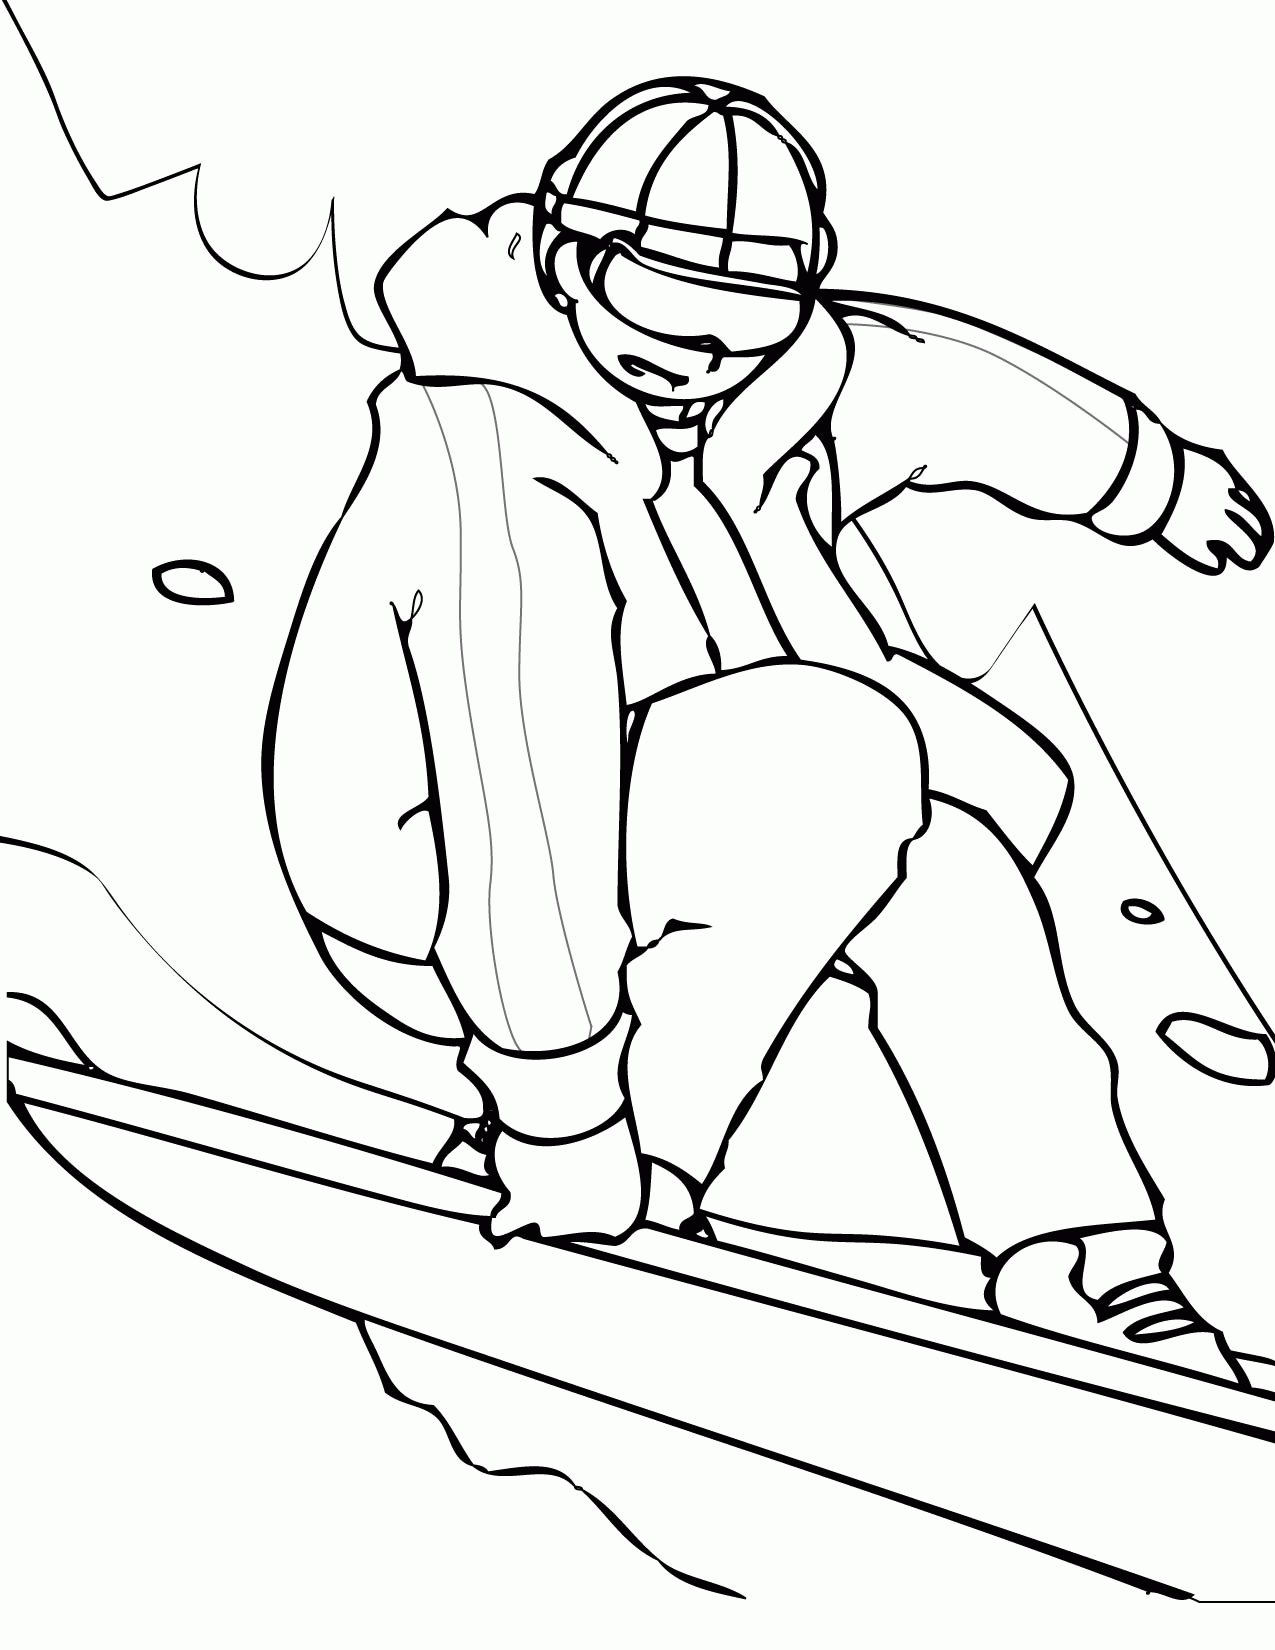 Snowboarding Coloring Page - Handipoints